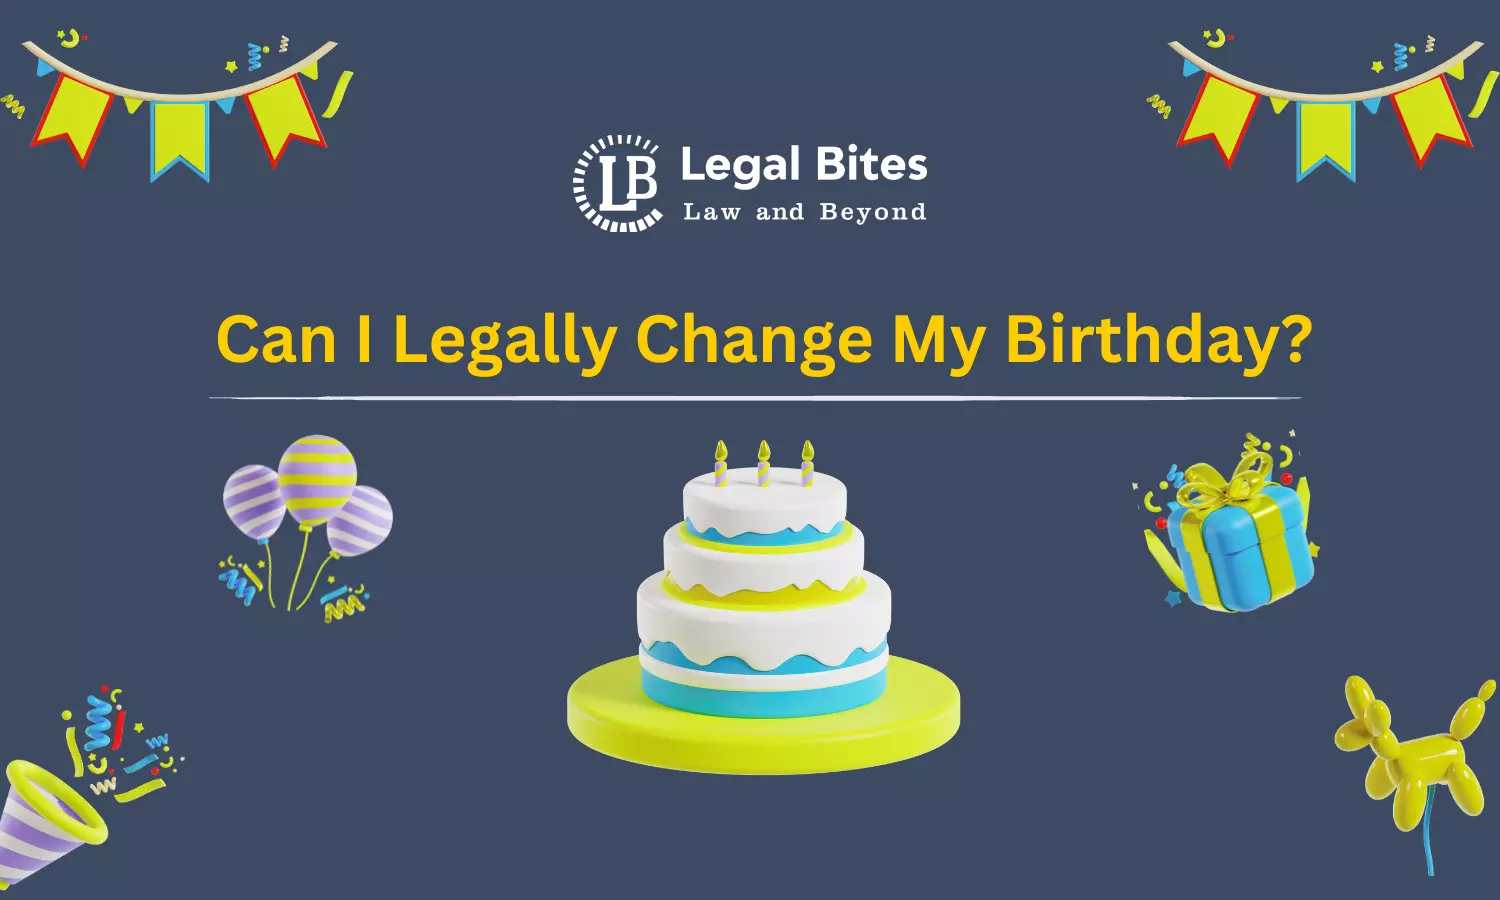 Can I Legally Change My Birthday?